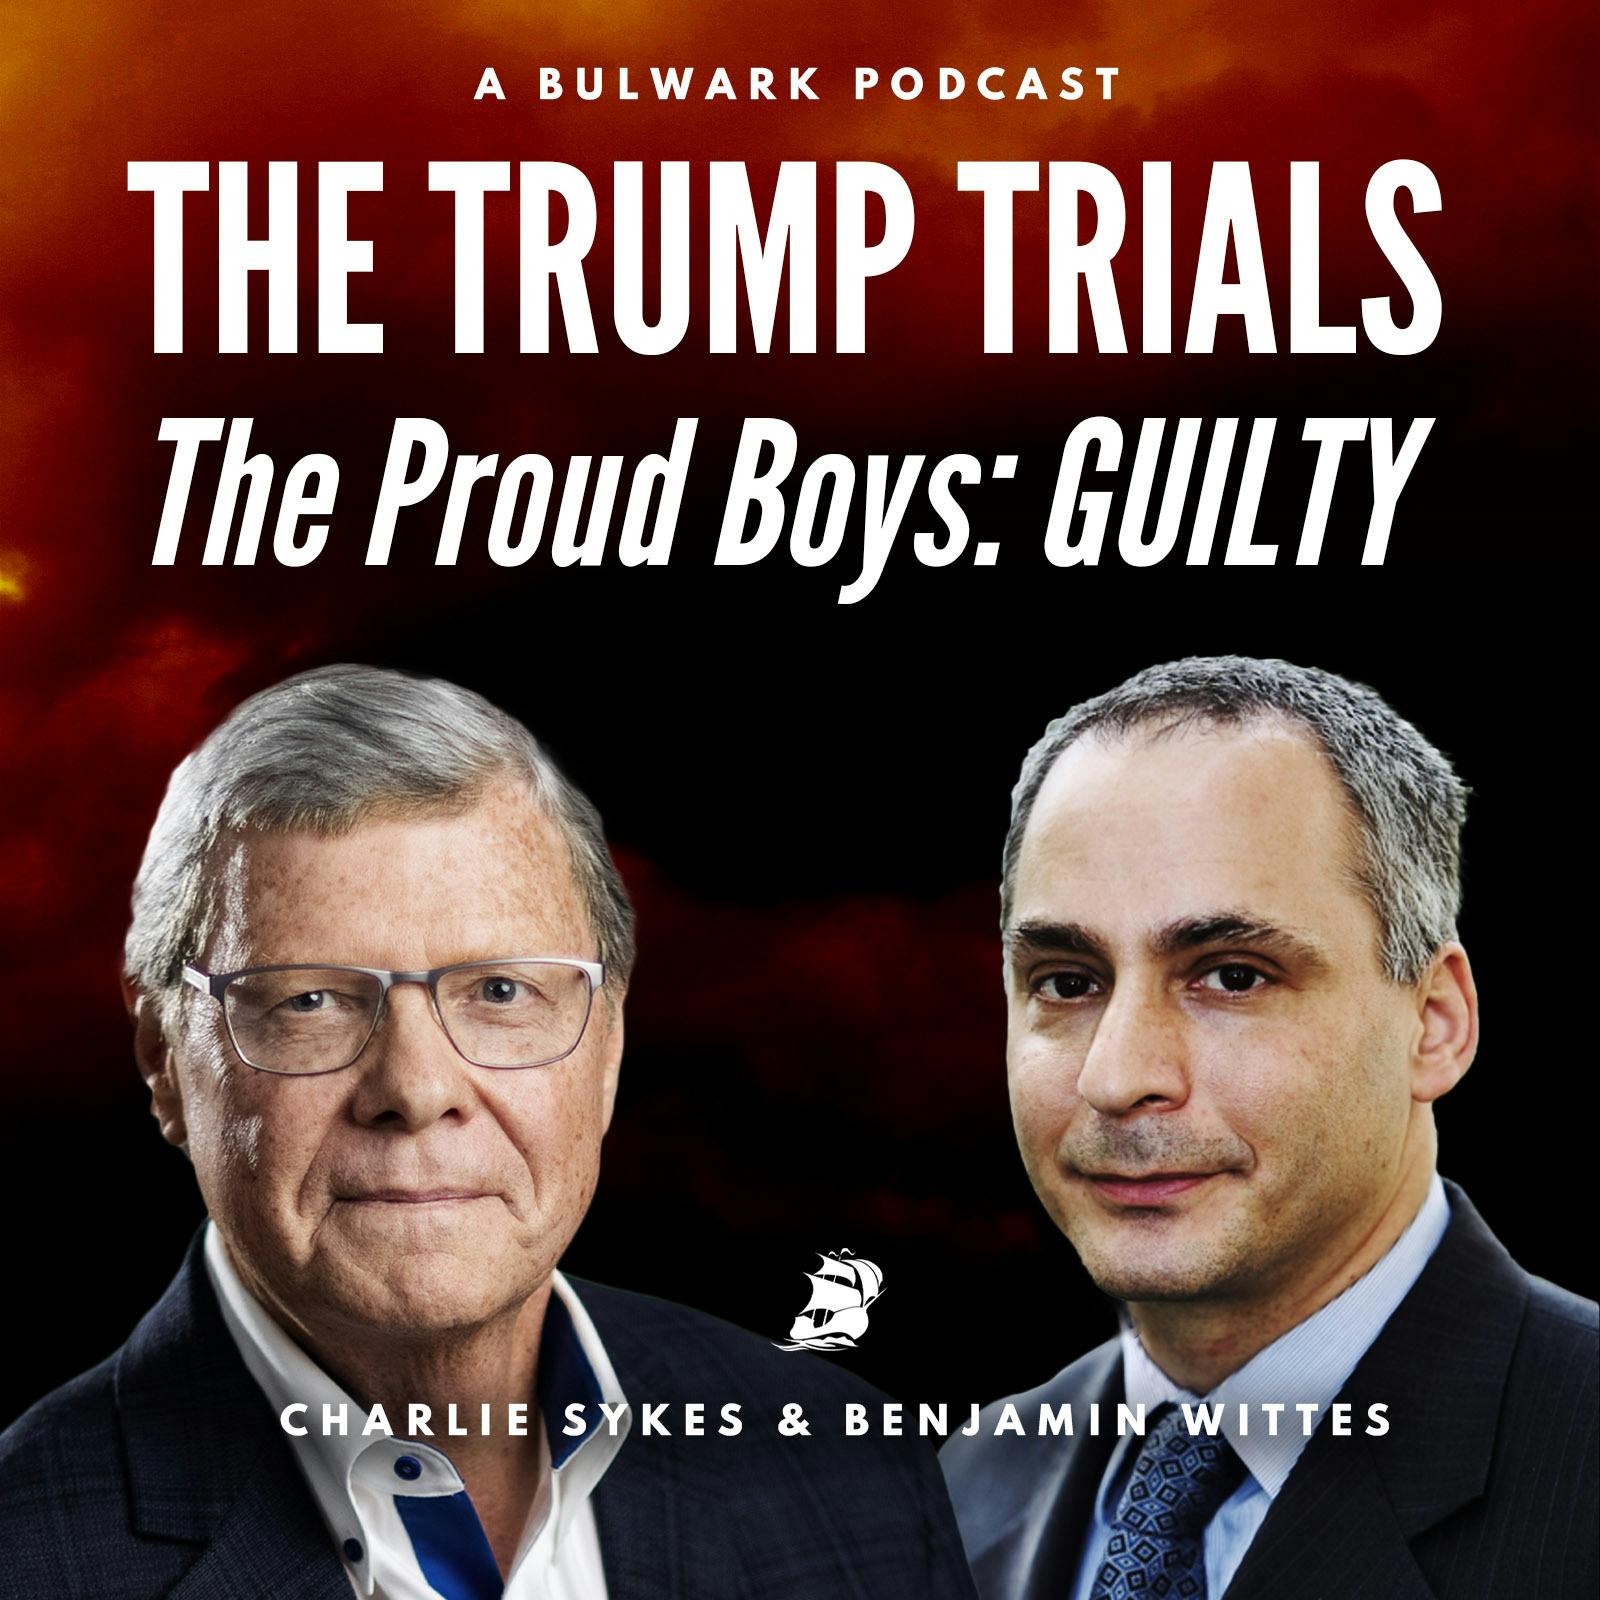 The Proud Boys: GUILTY